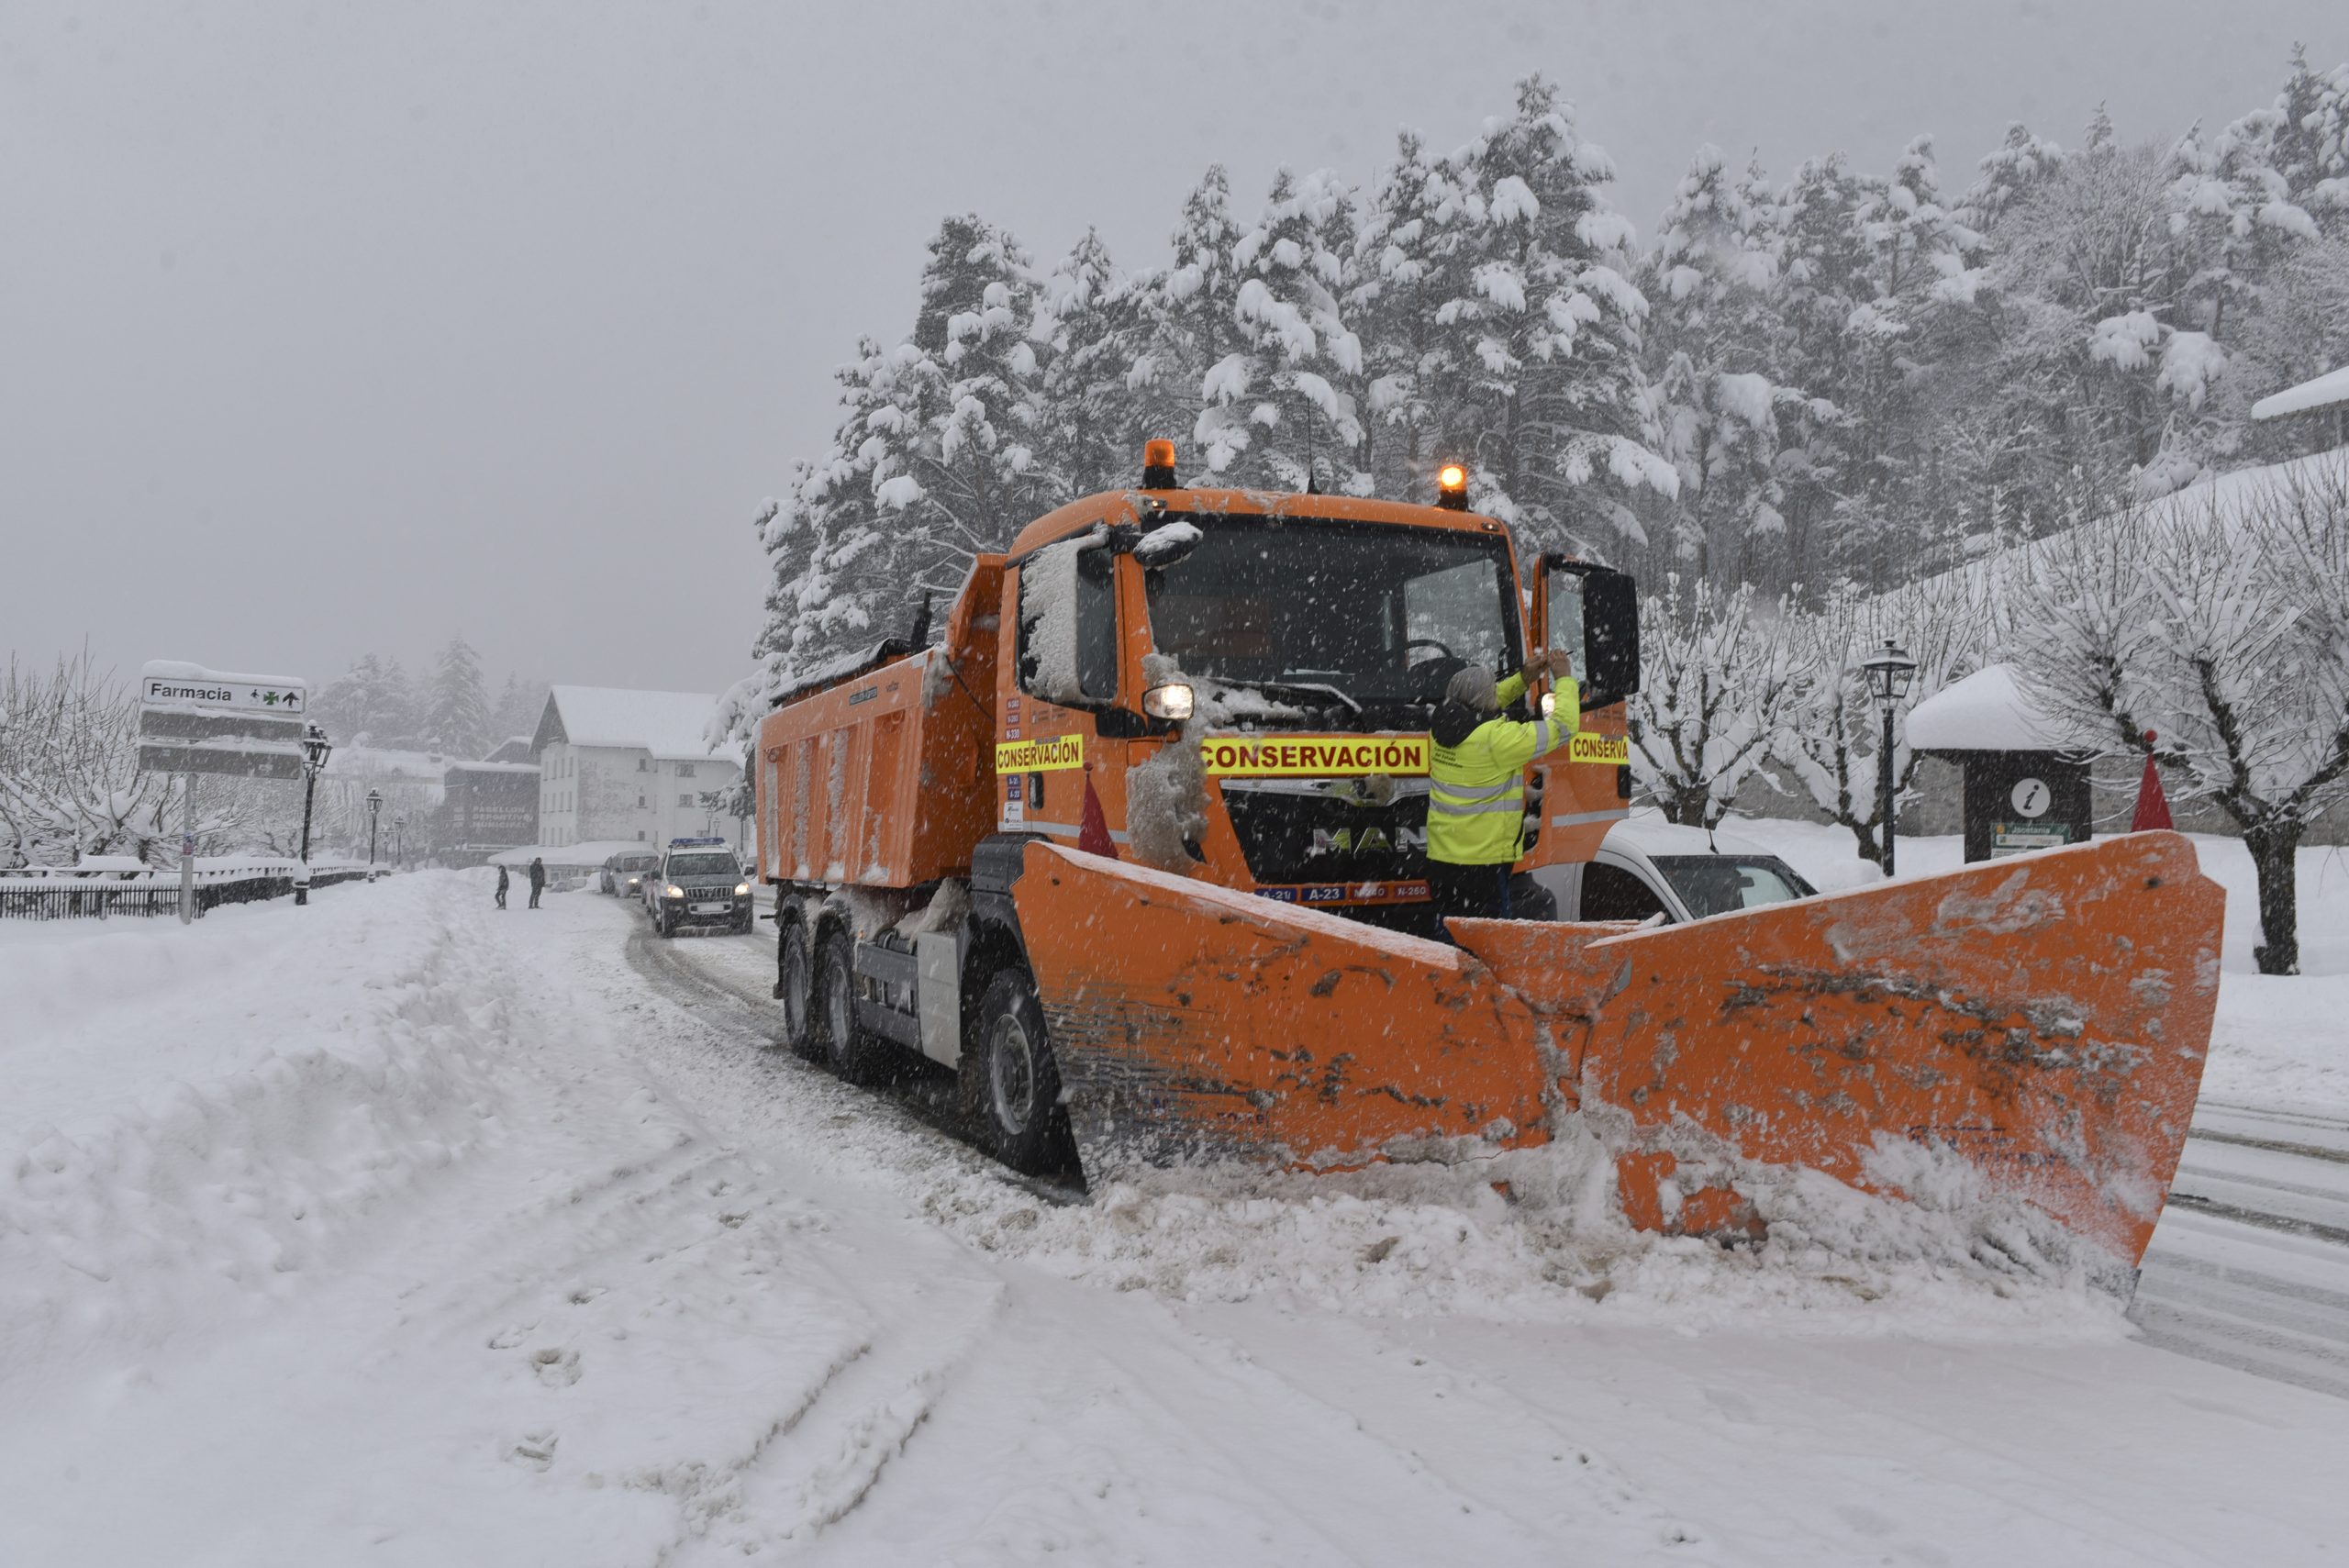 A snowplow clearing a snow-filled road